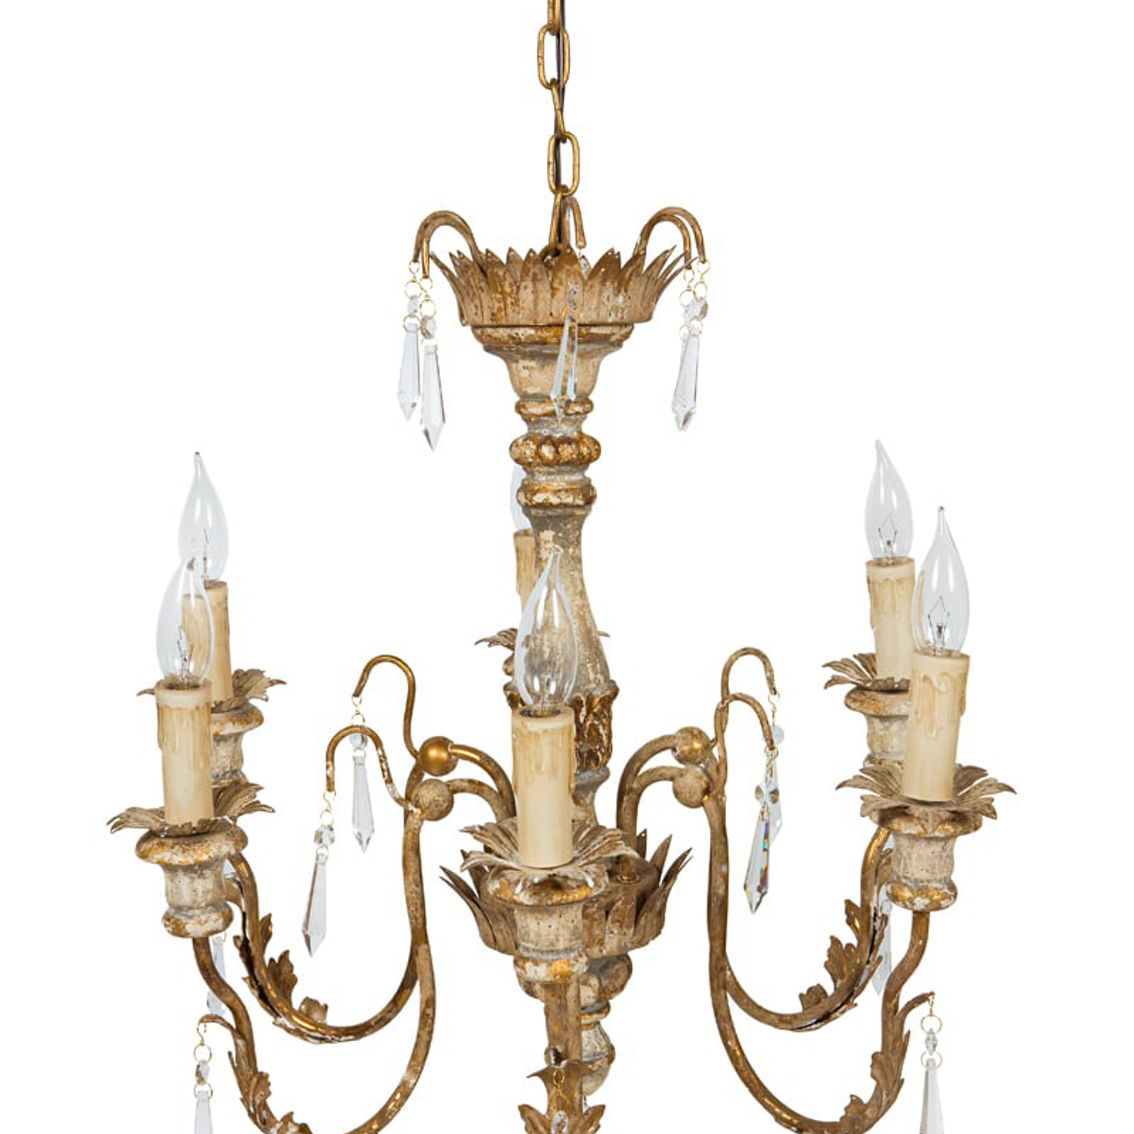 Manor Luxe, Monticello Wood, Metal & Glass Crystal Luxury 6 Candelabra Chandelier - Image 2 of 2